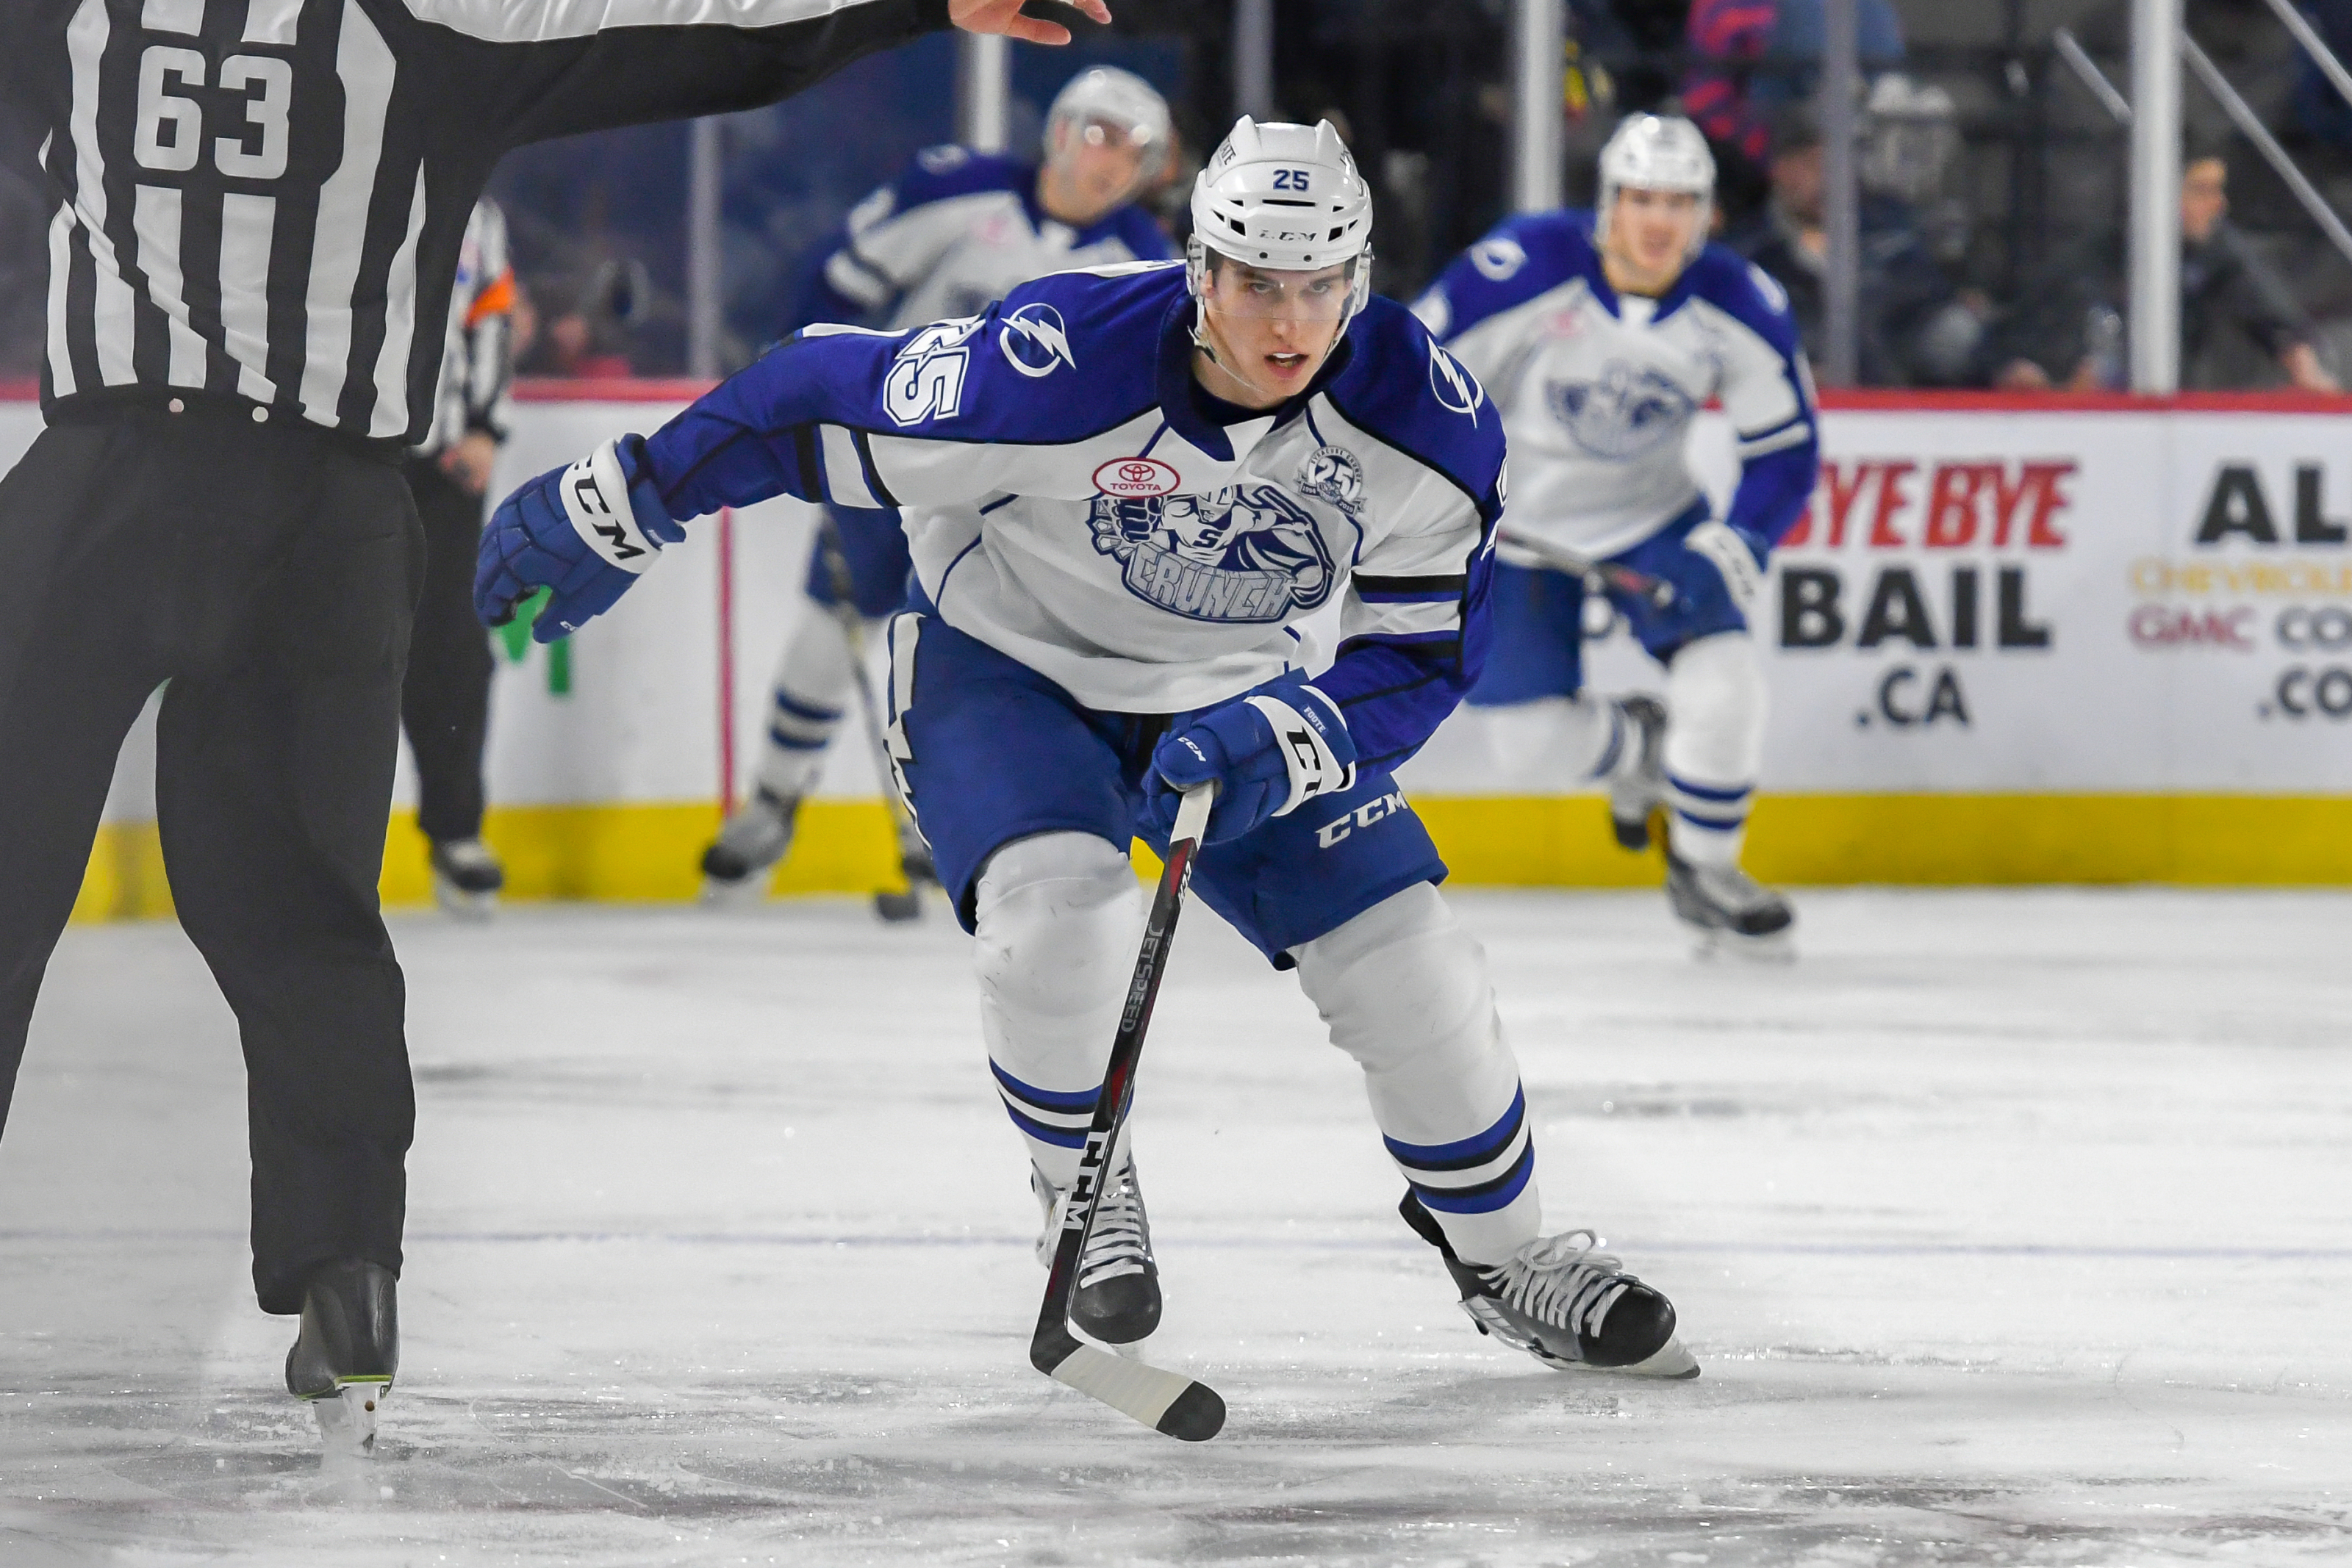 What are the Top-5 seasons in Syracuse Crunch history?